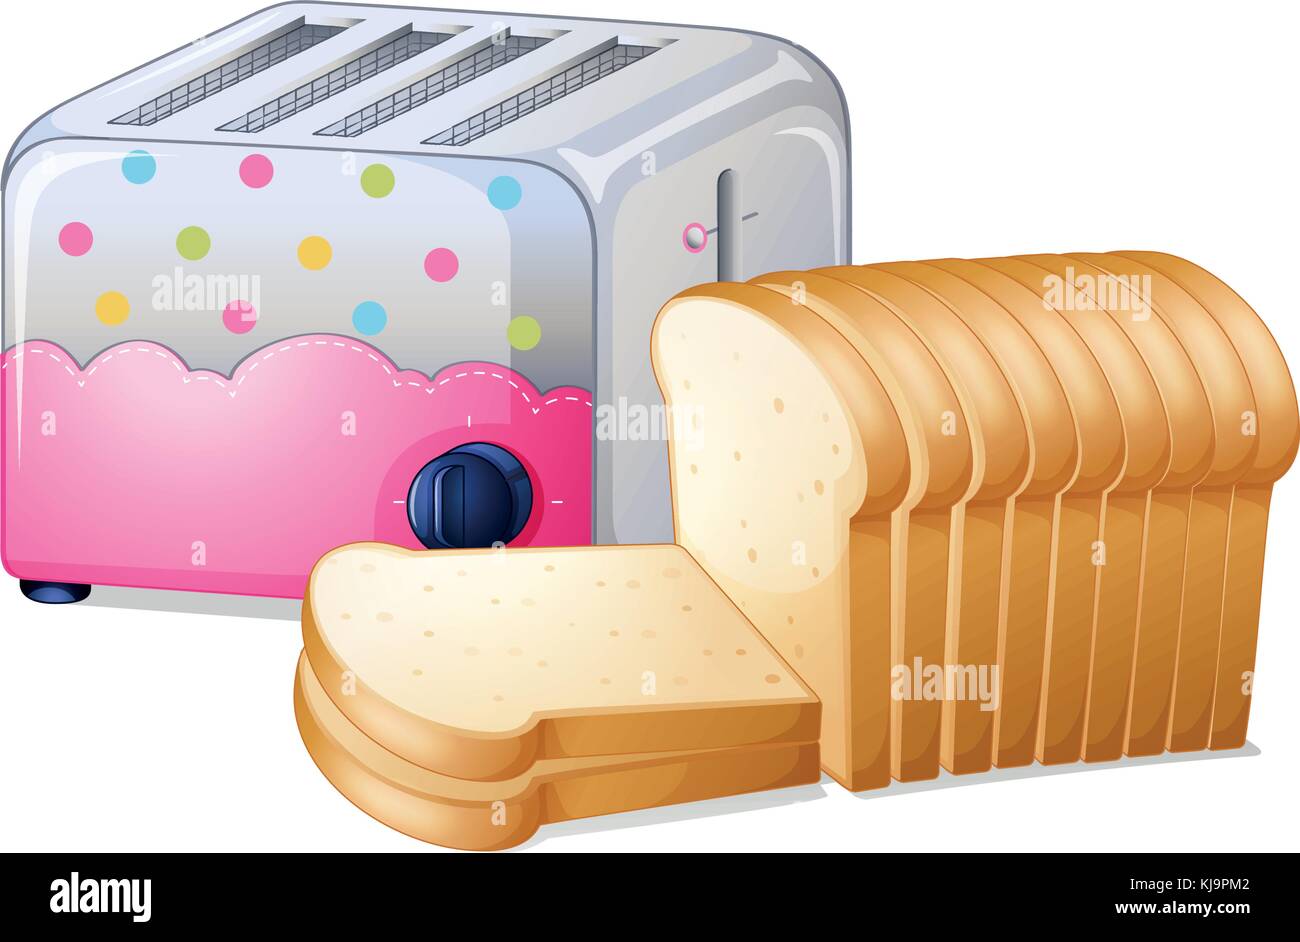 Illustration of an oven toaster and slices of breads on a white background Stock Vector